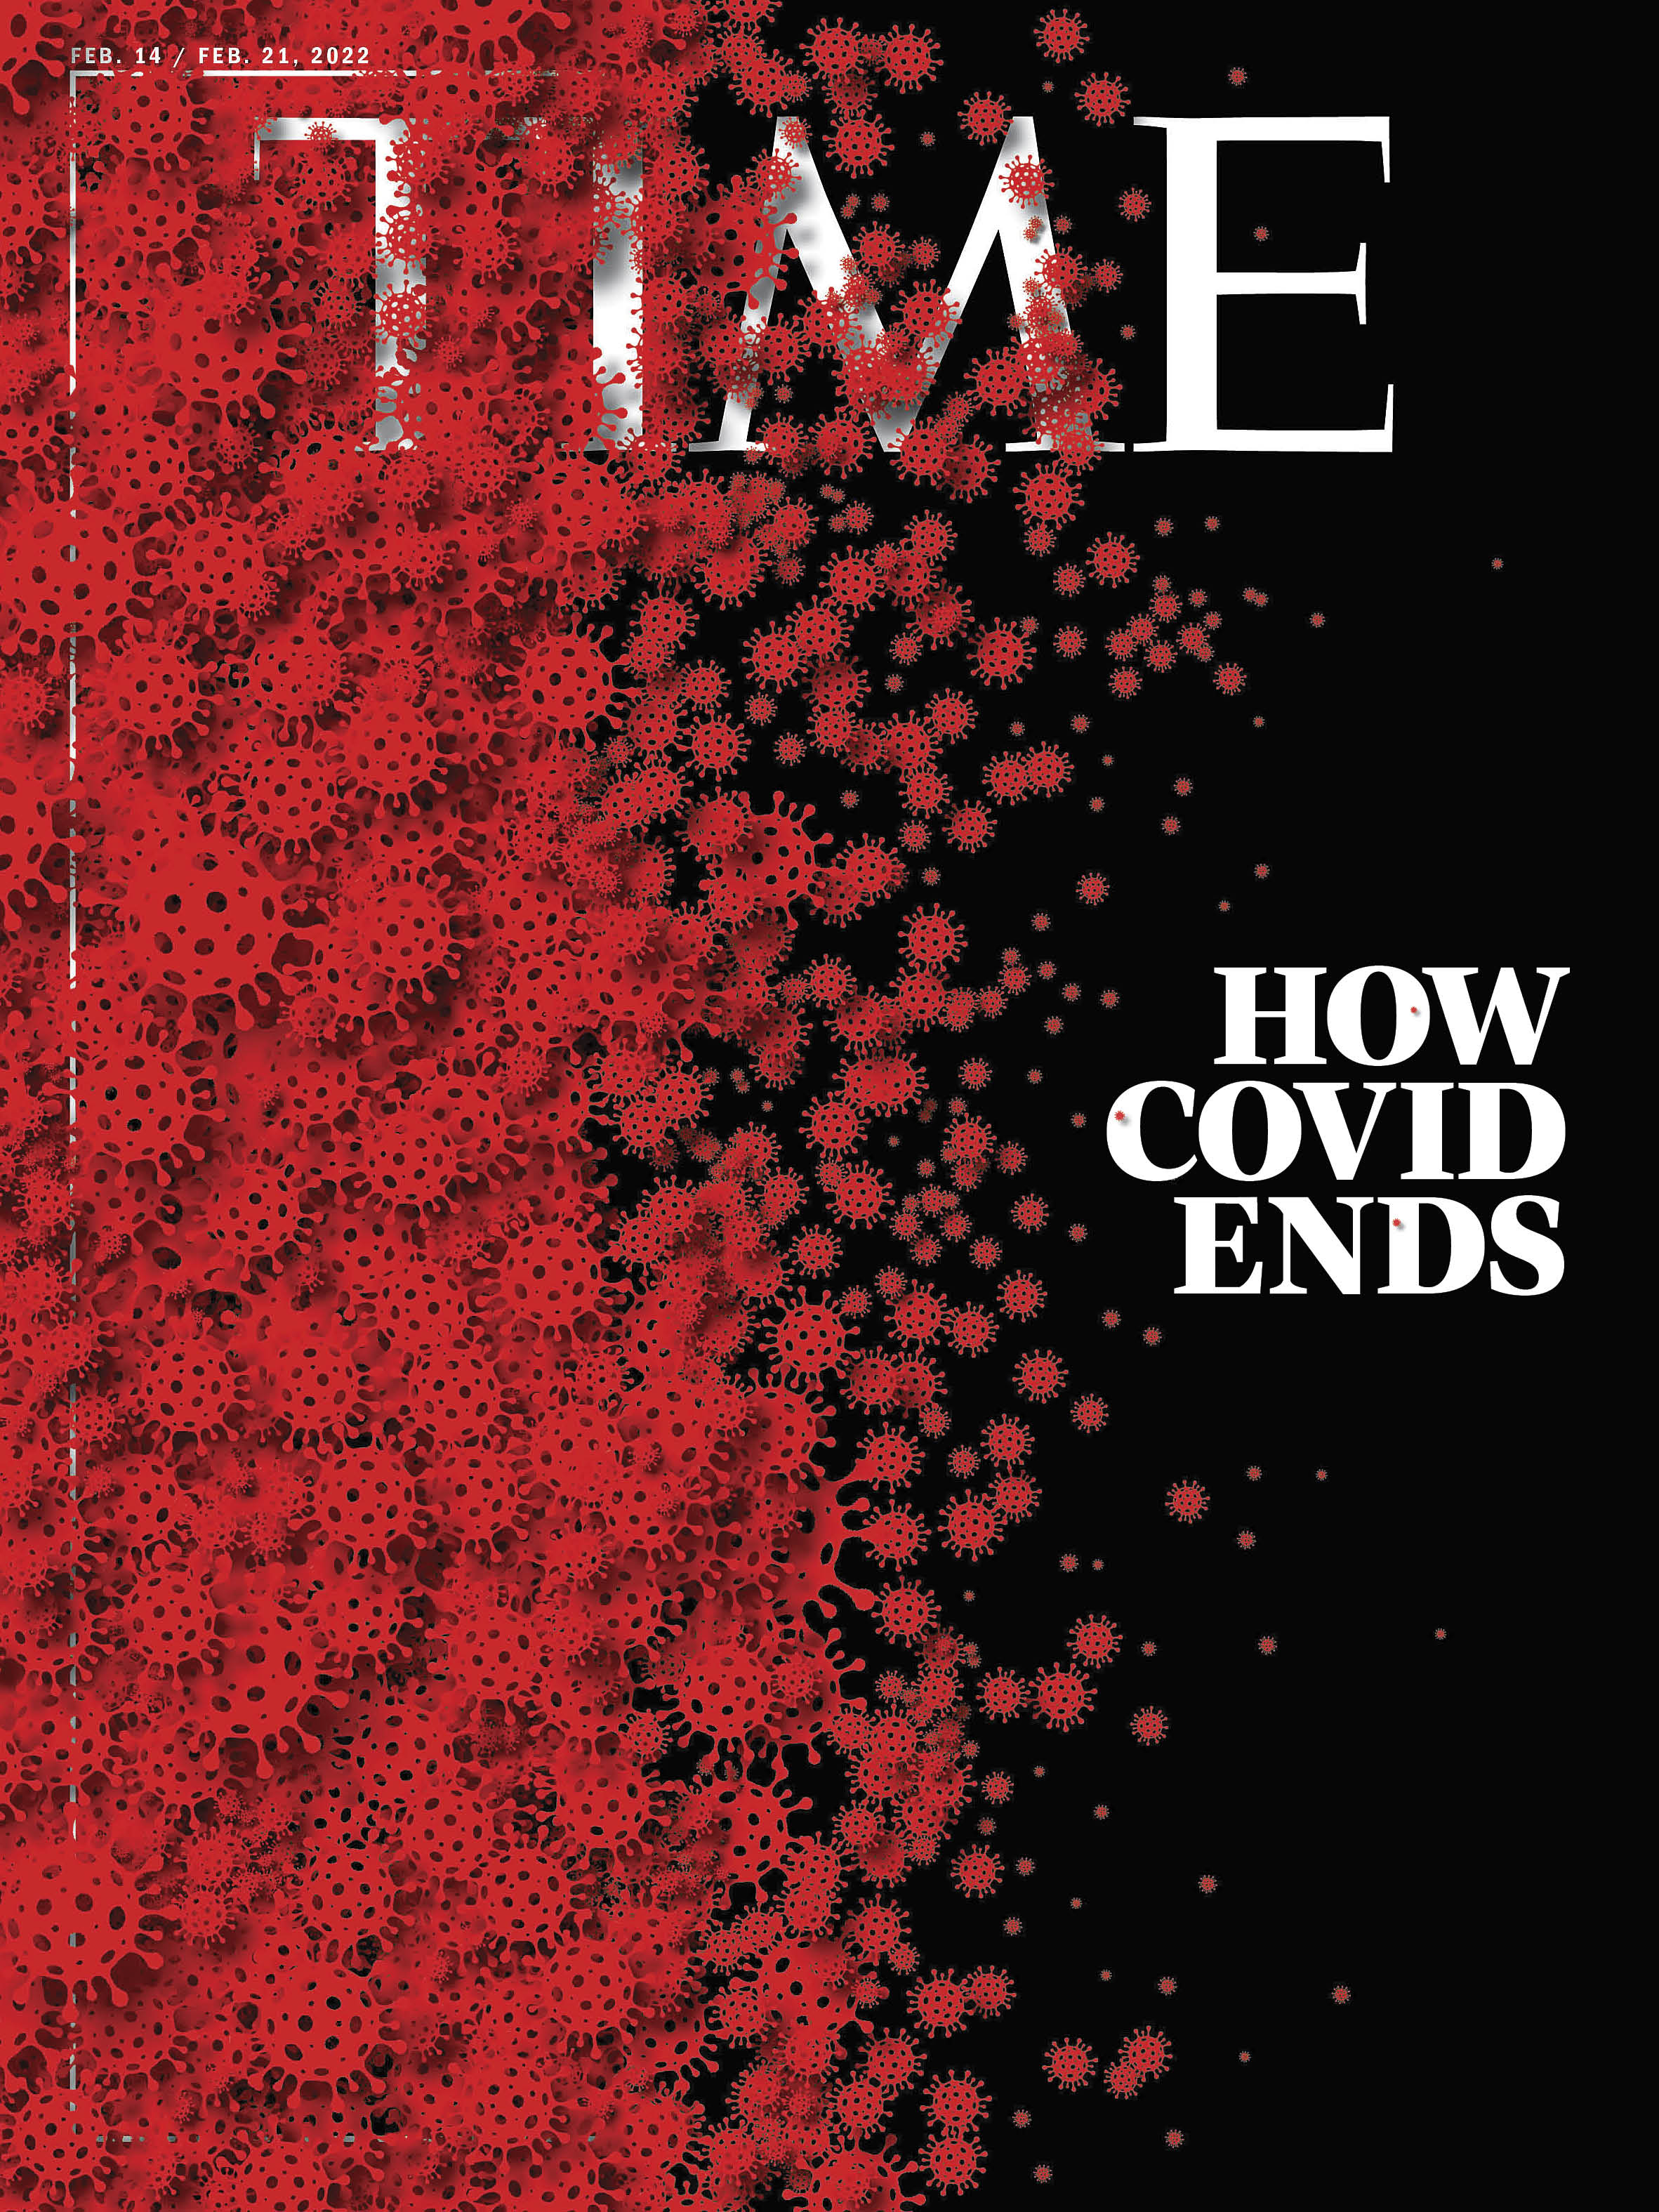 How Covid Ends Time Magazine cover